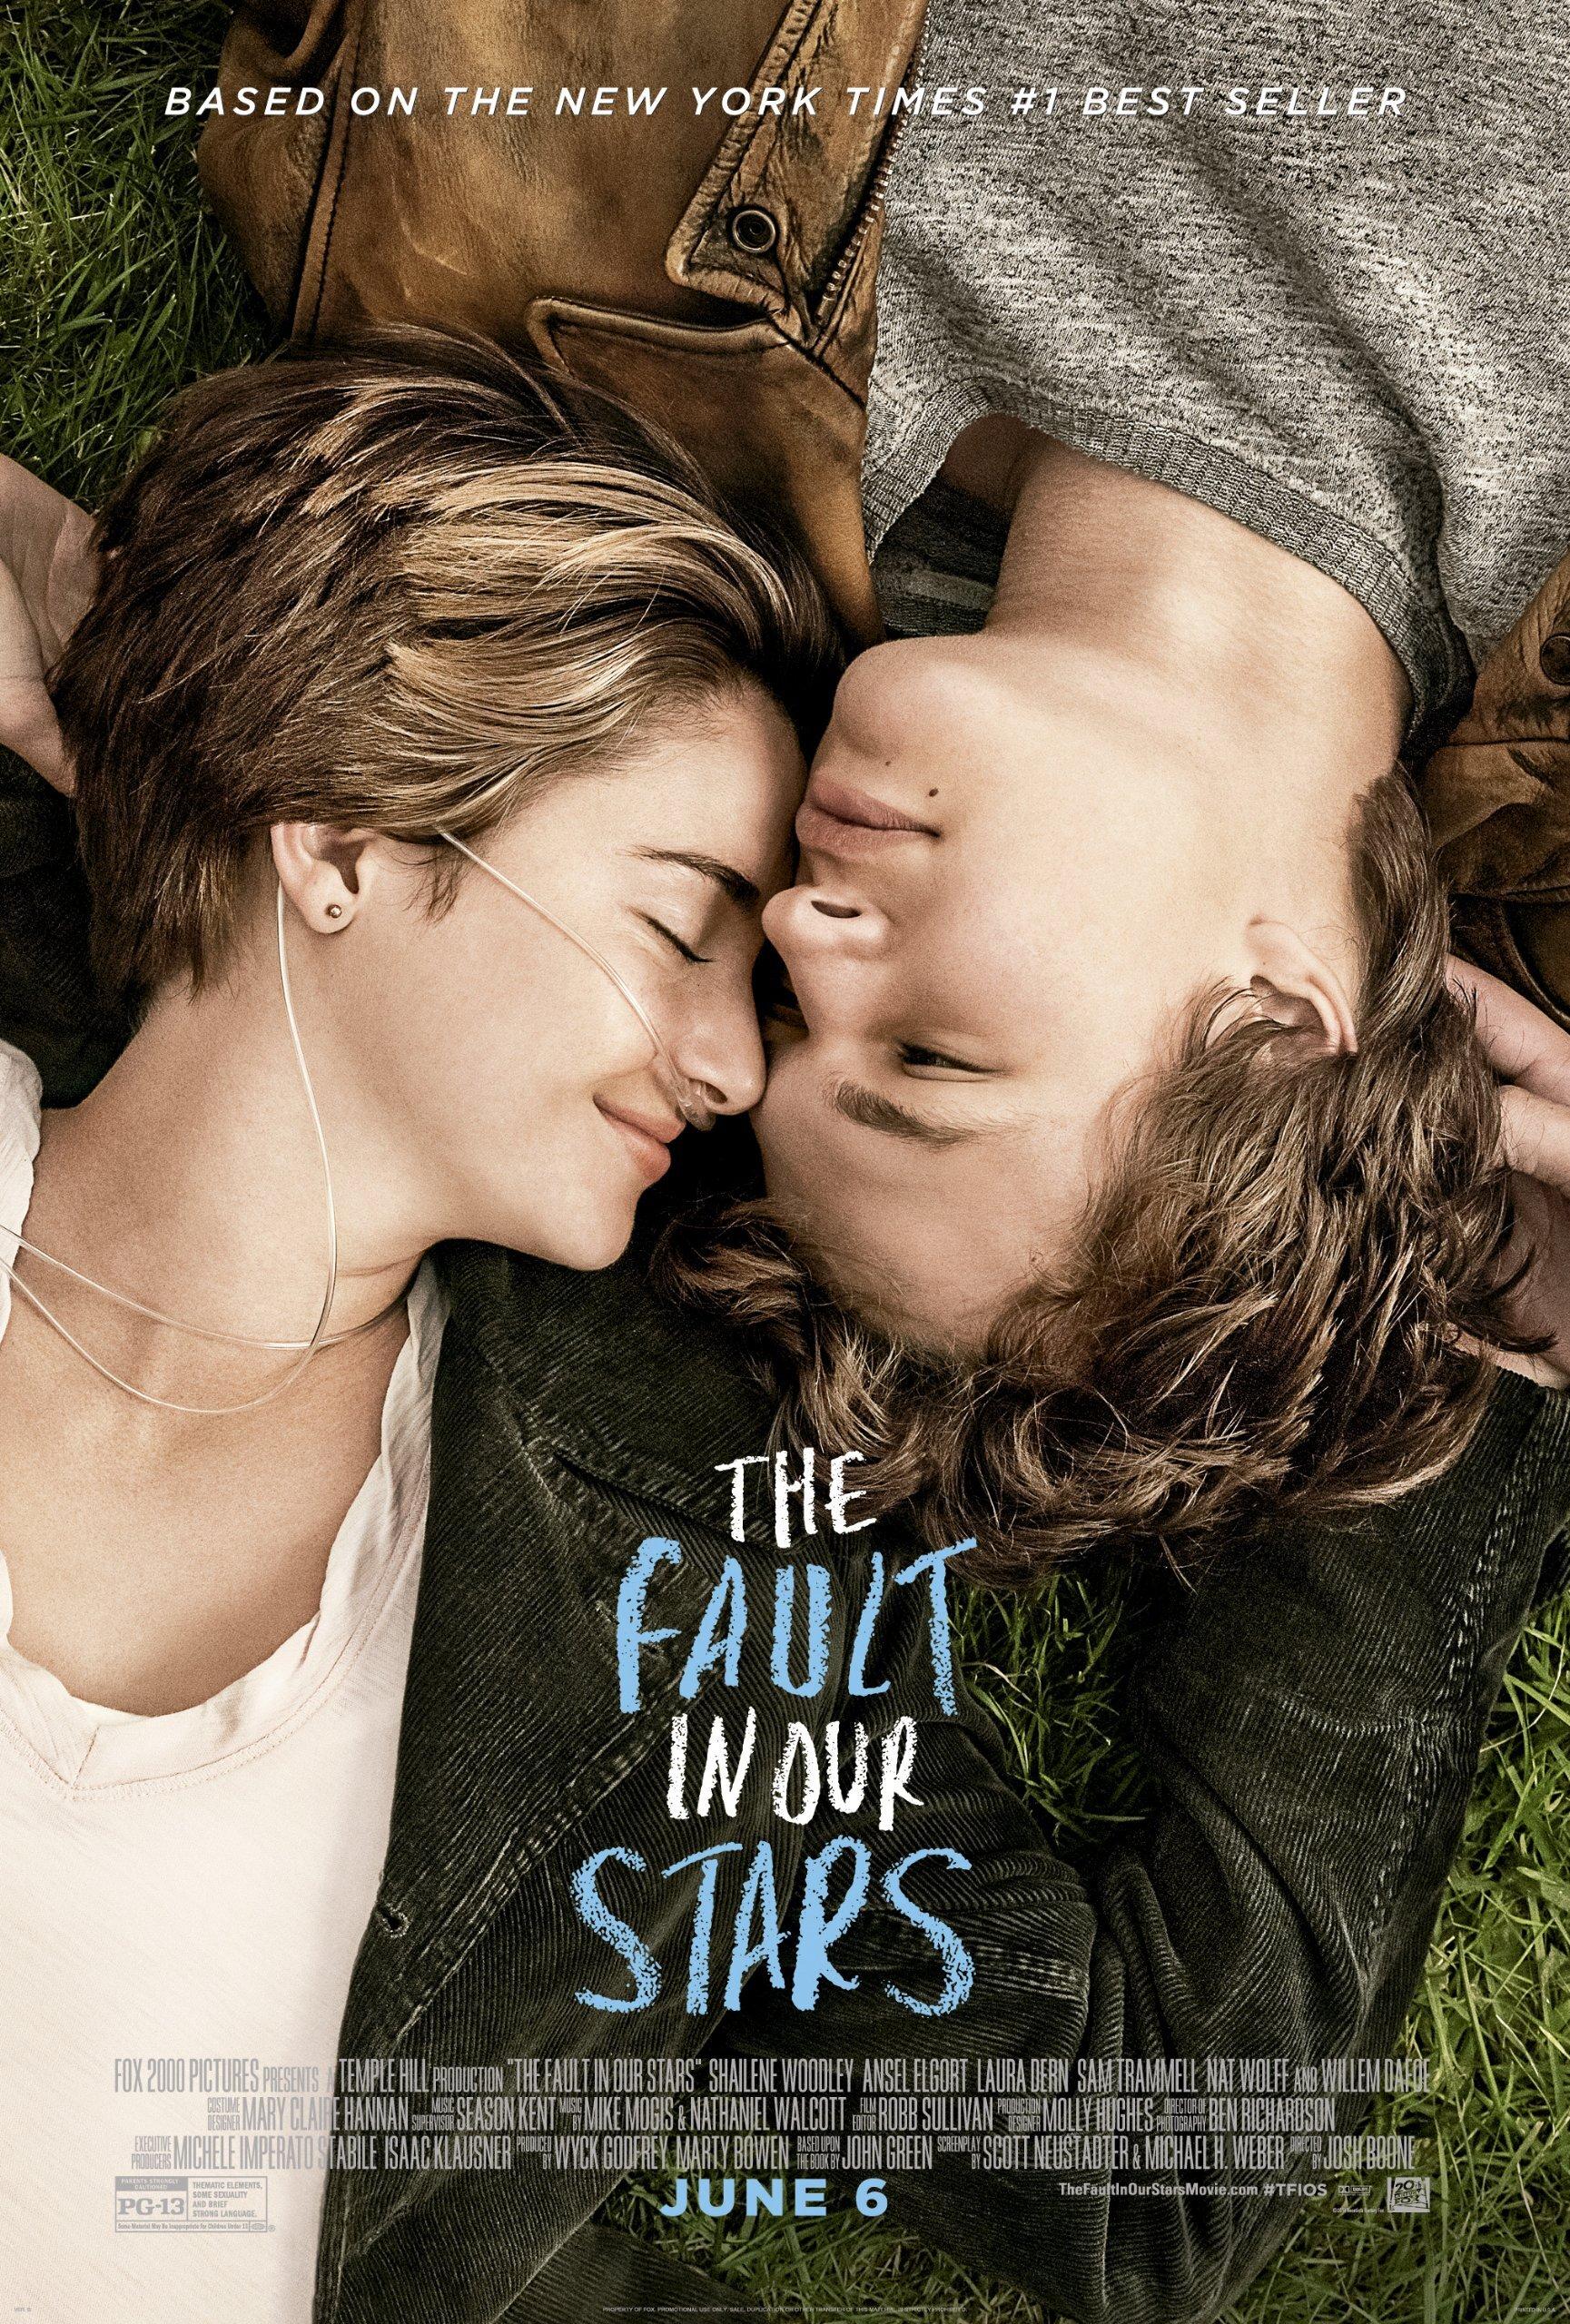 Poster phim The Fault in Our Stars. (Nguồn: Internet)